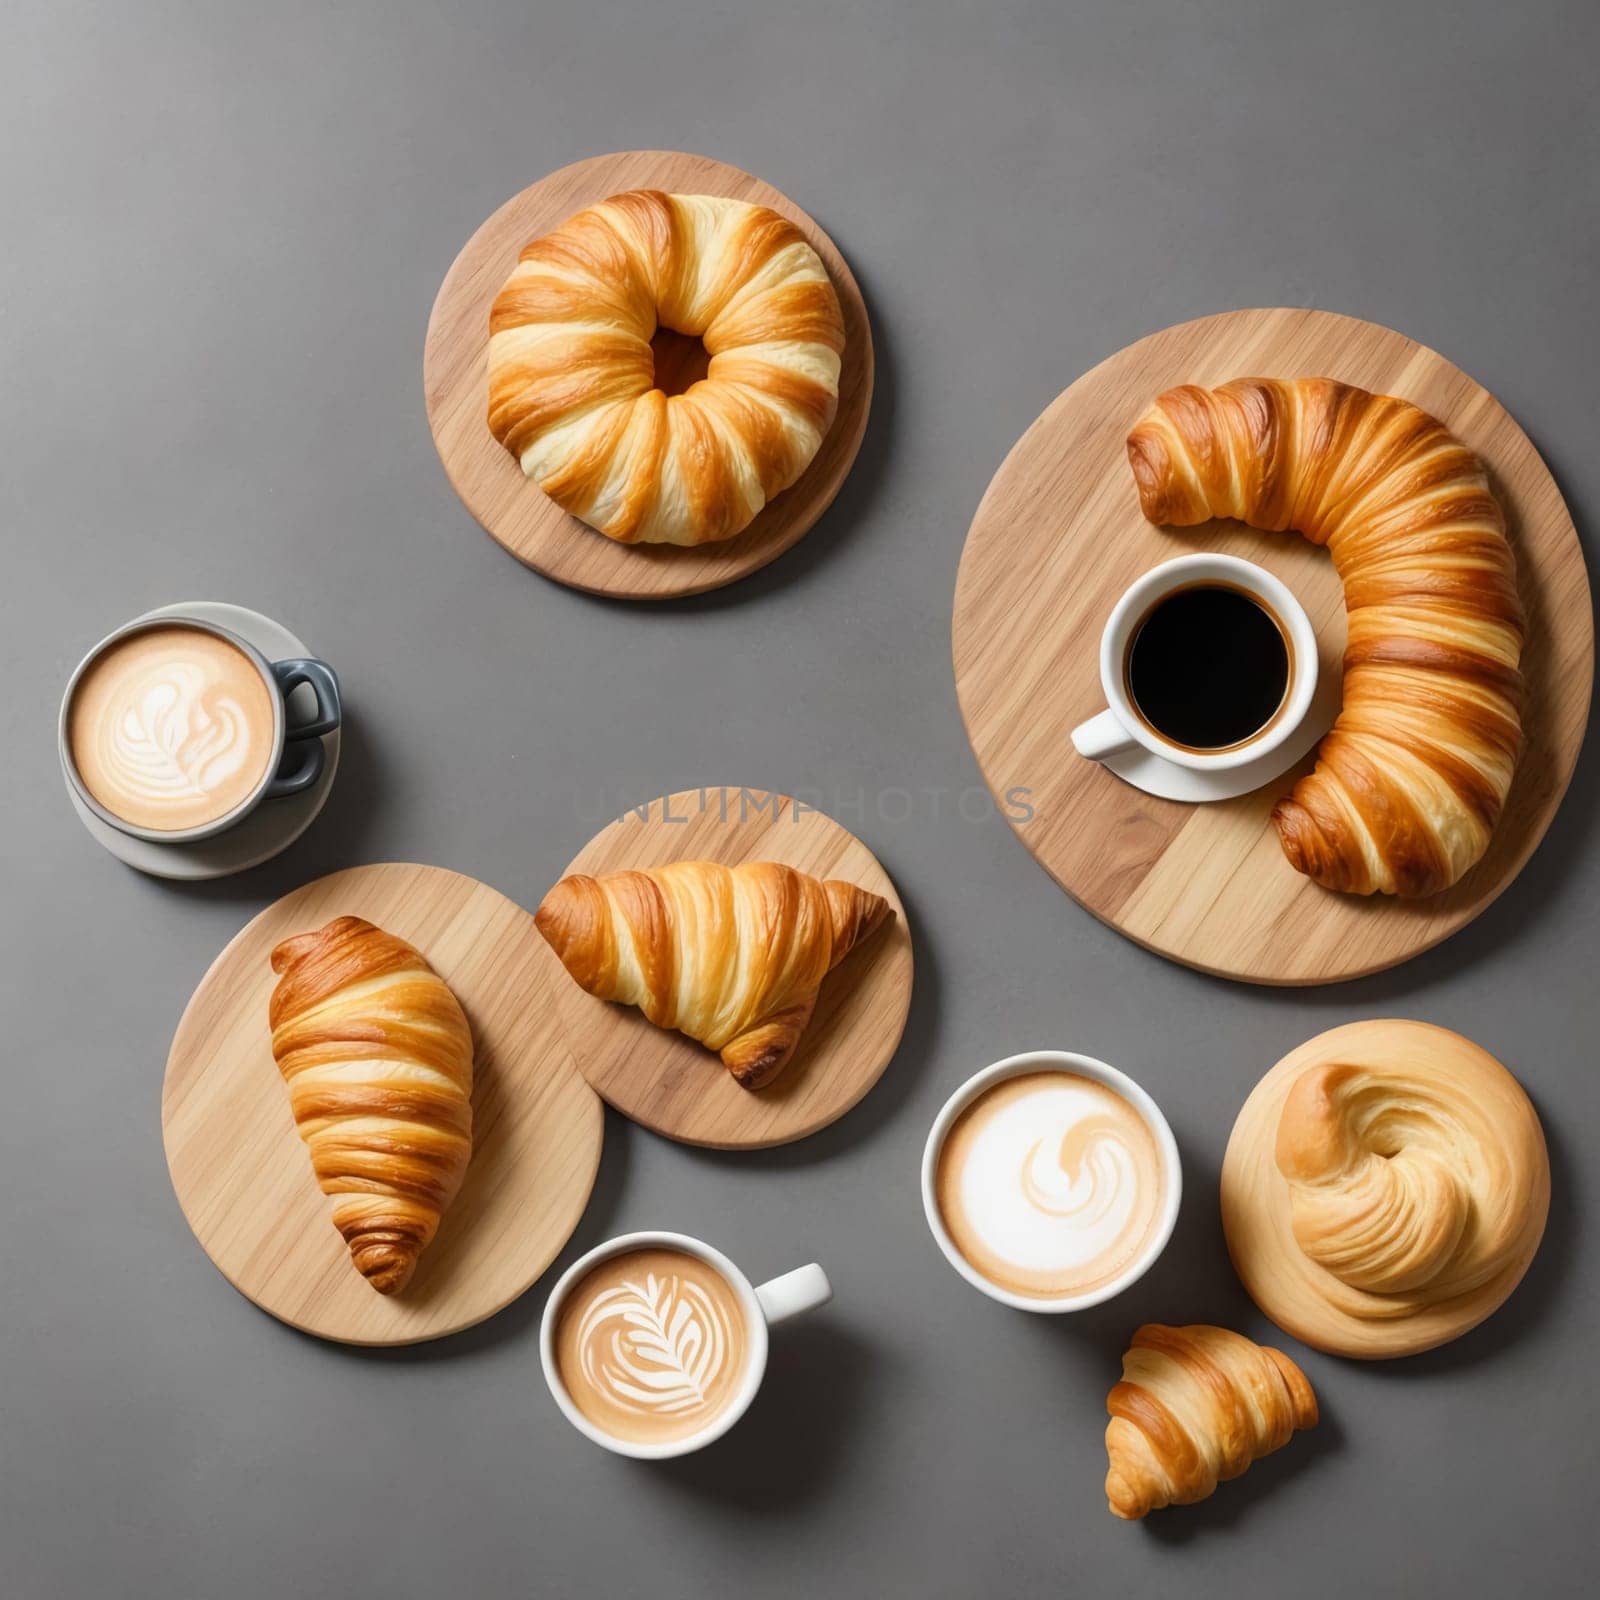 Freshly baked croissants on a wooden board next to a cup of hot coffee on a gray background